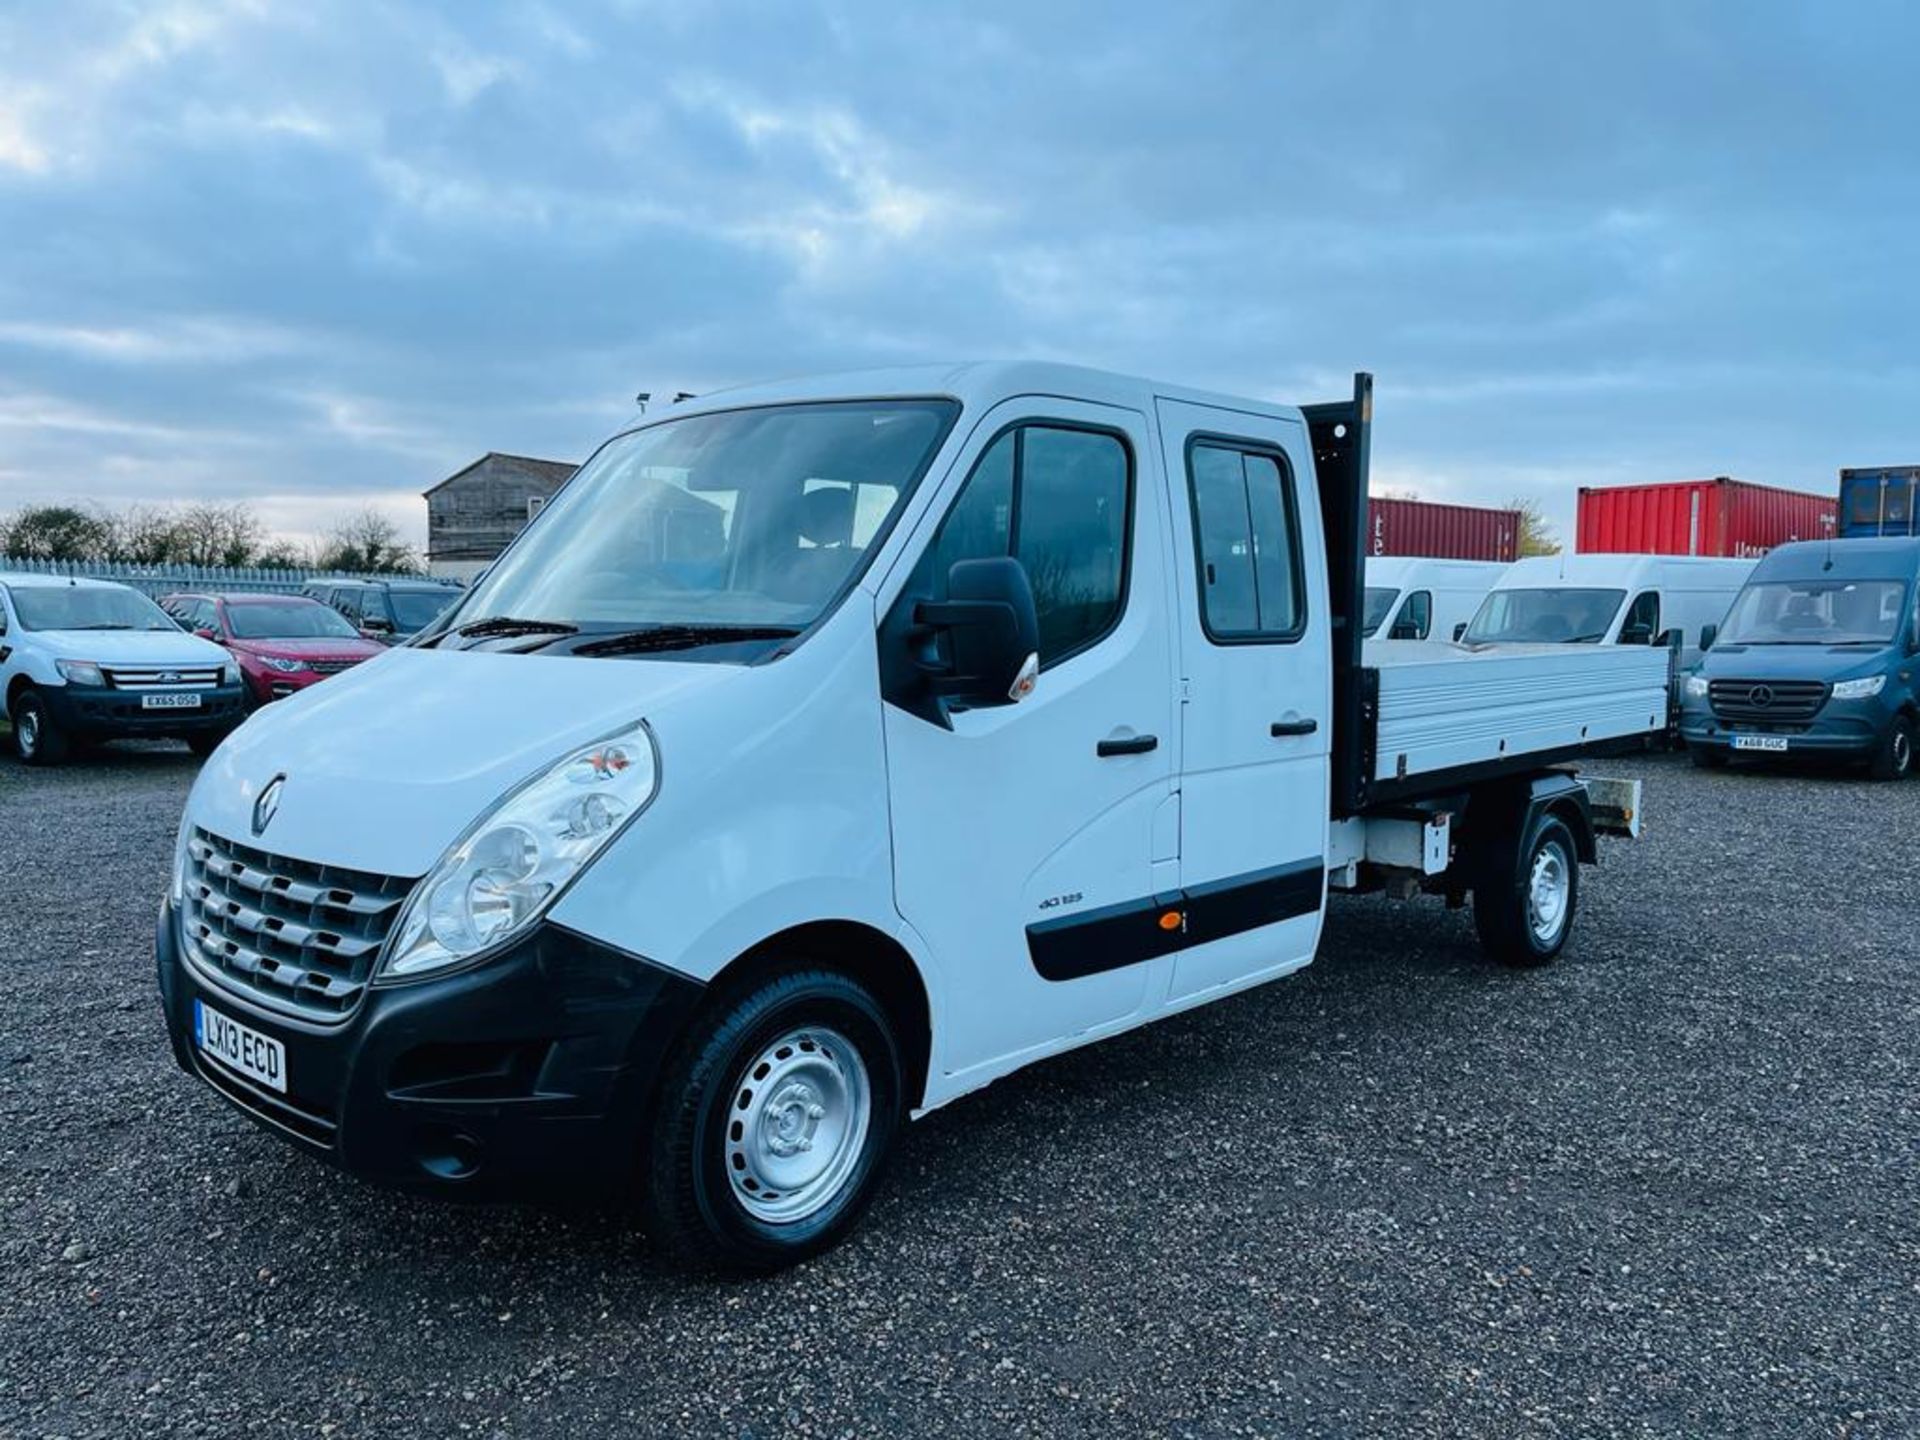 ** ON SALE ** Renault Master 2.3 DCI 125 LL35 DRW RWD L3 Crew Tipper 2013 '13 Reg' - Image 3 of 32